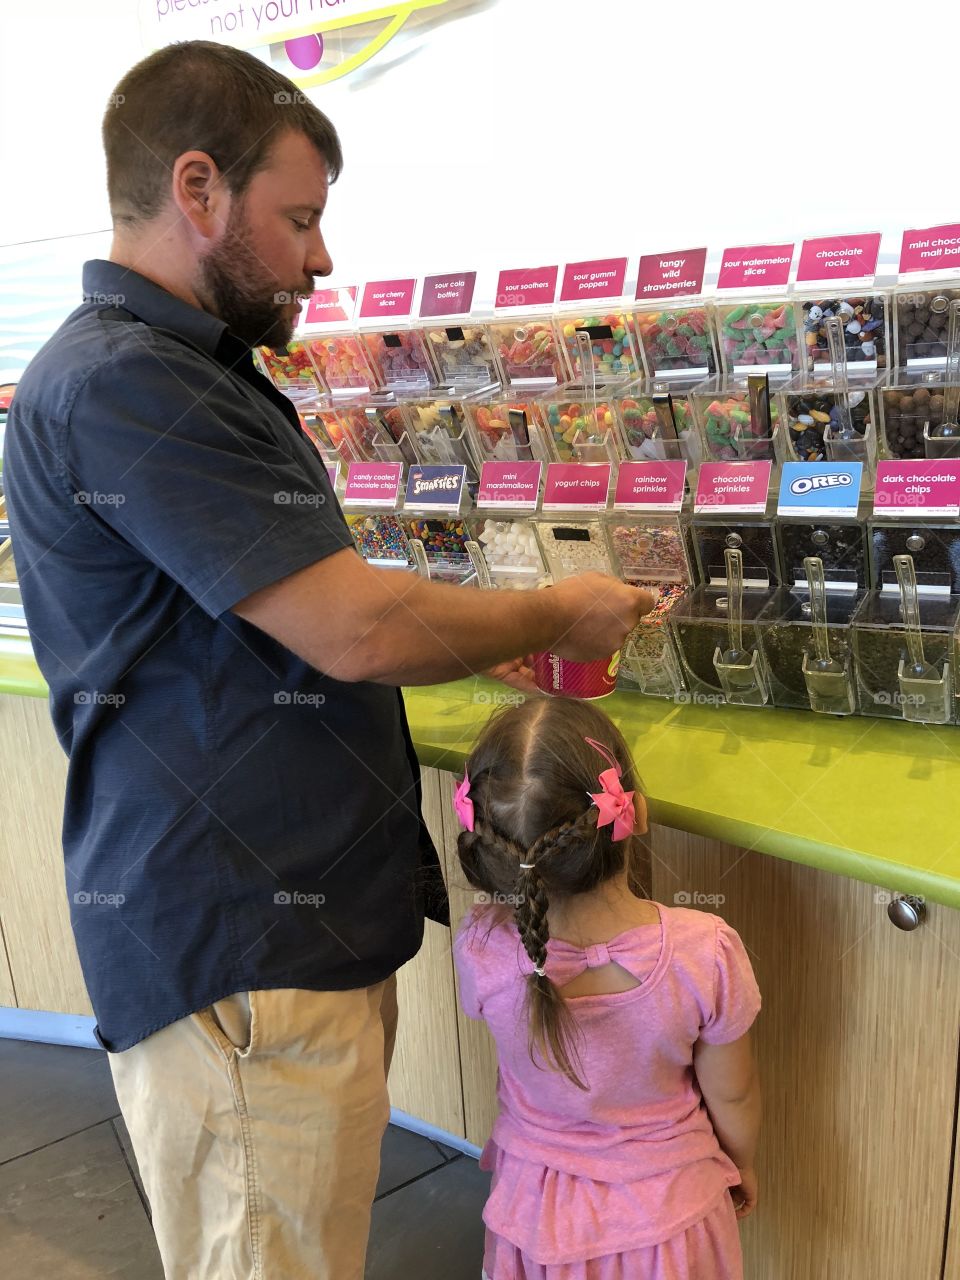 Daddy Helping His Little Girl at Menchie’s